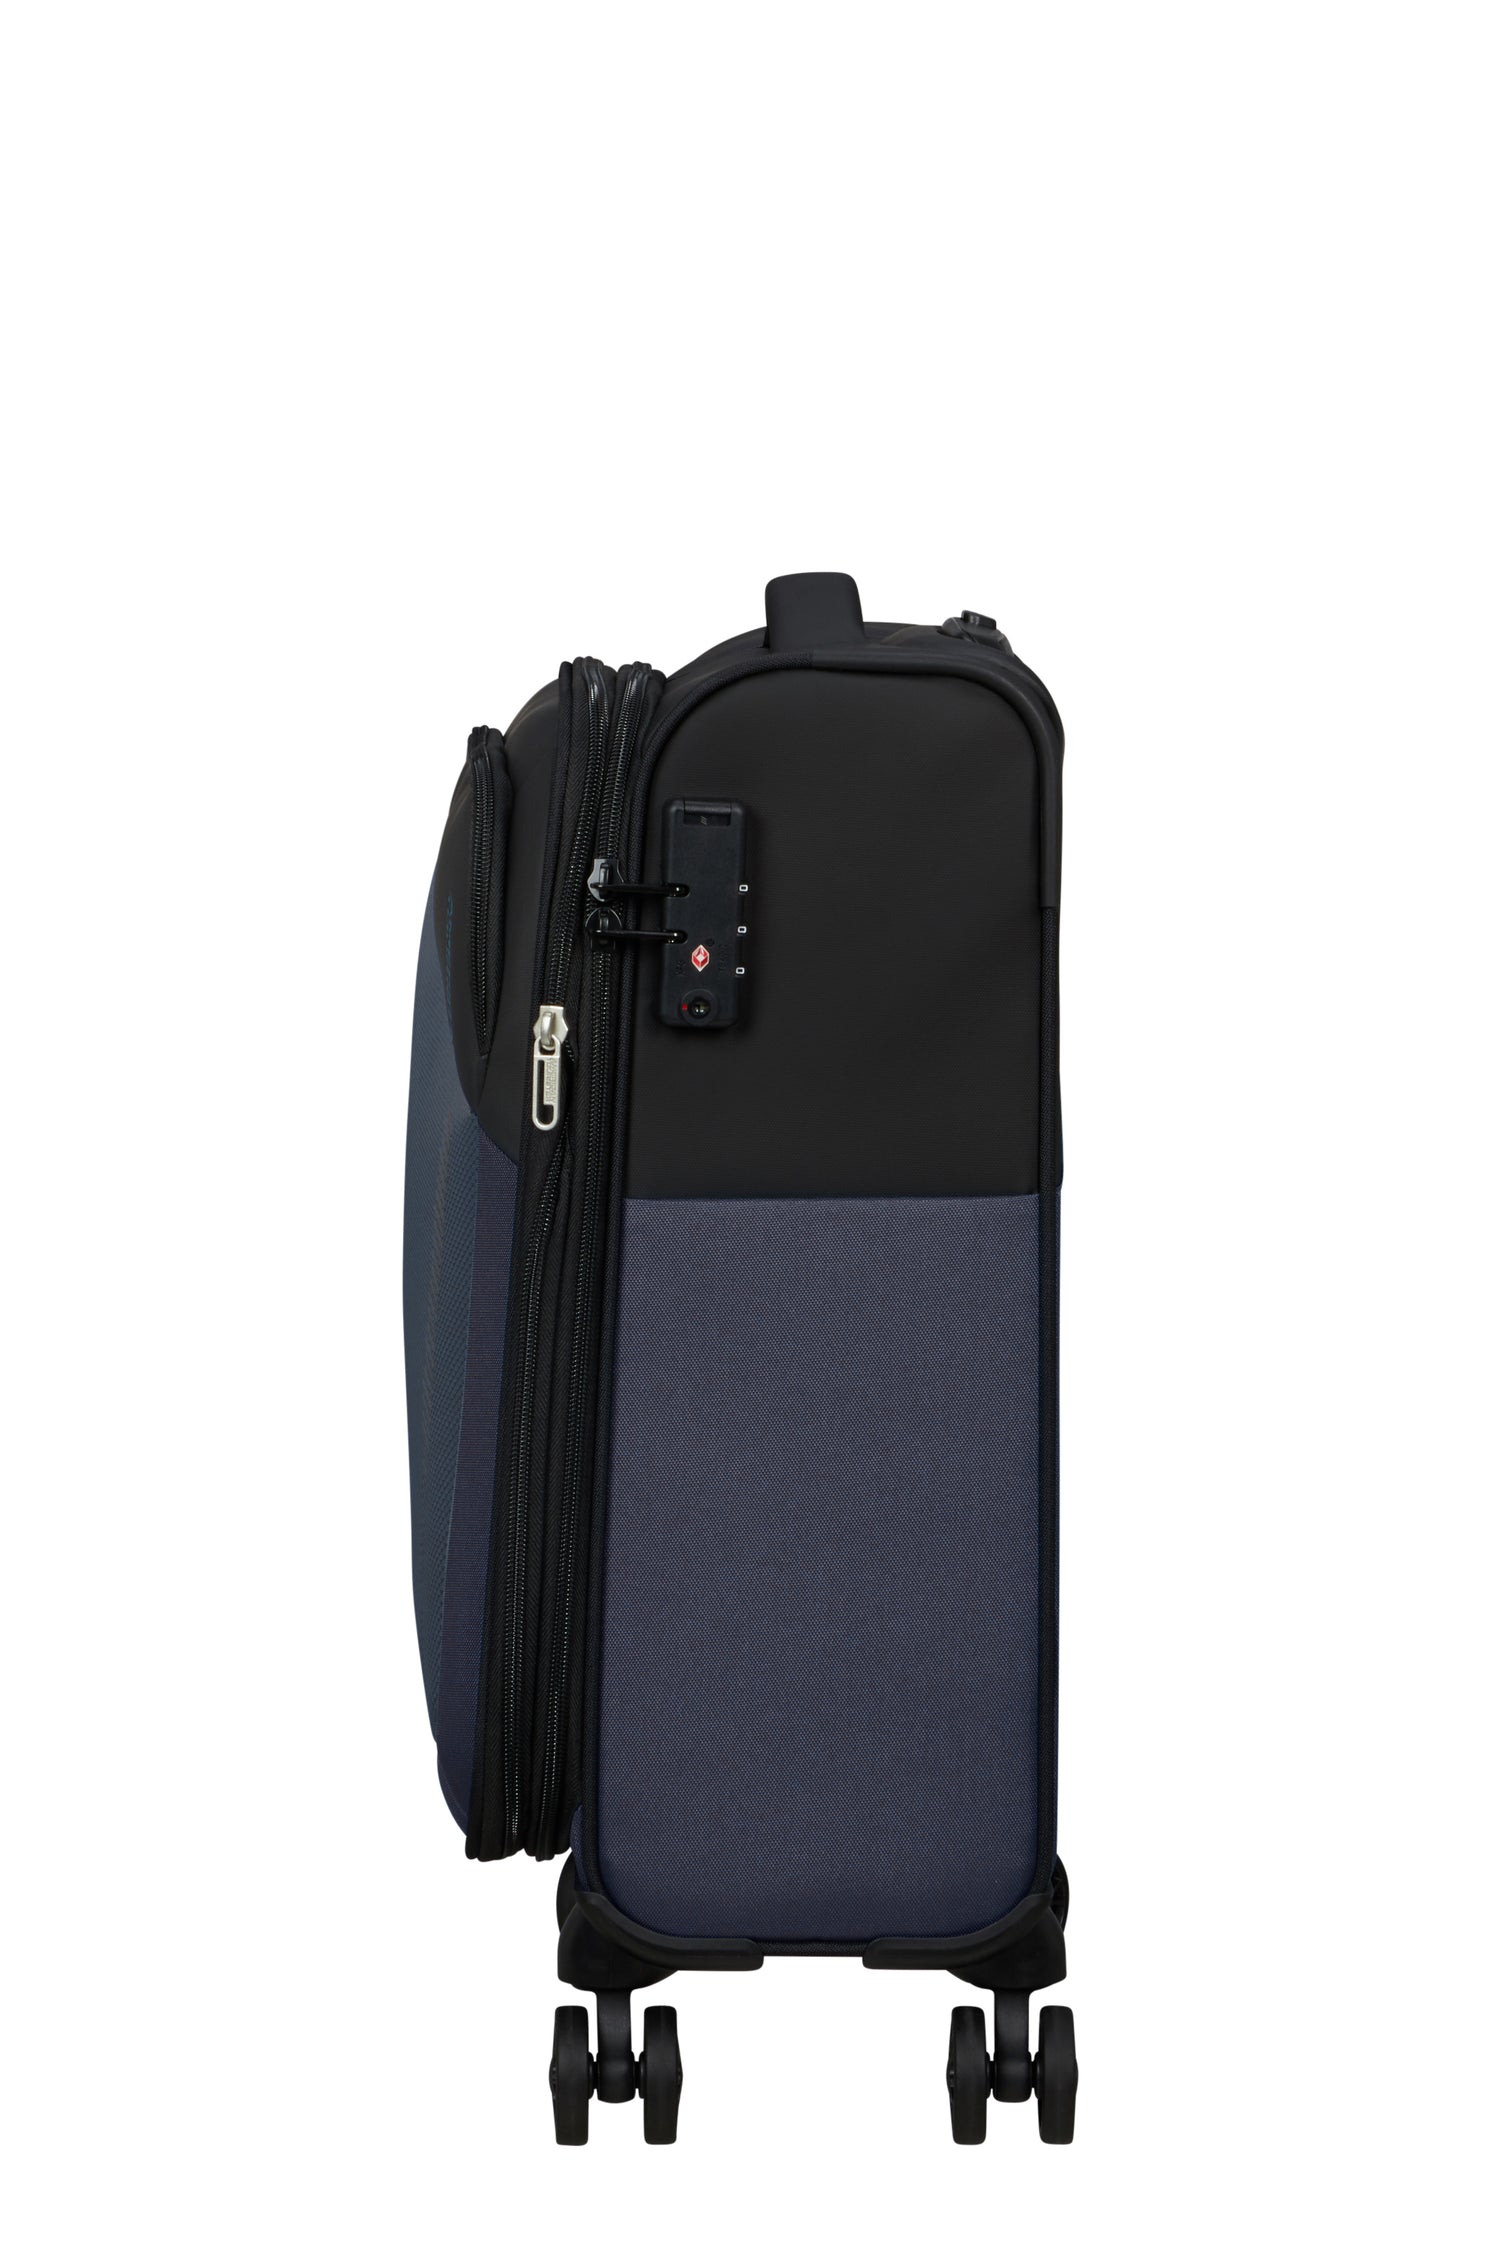 American Tourister Daring Dash Expandable 55cm Spinner